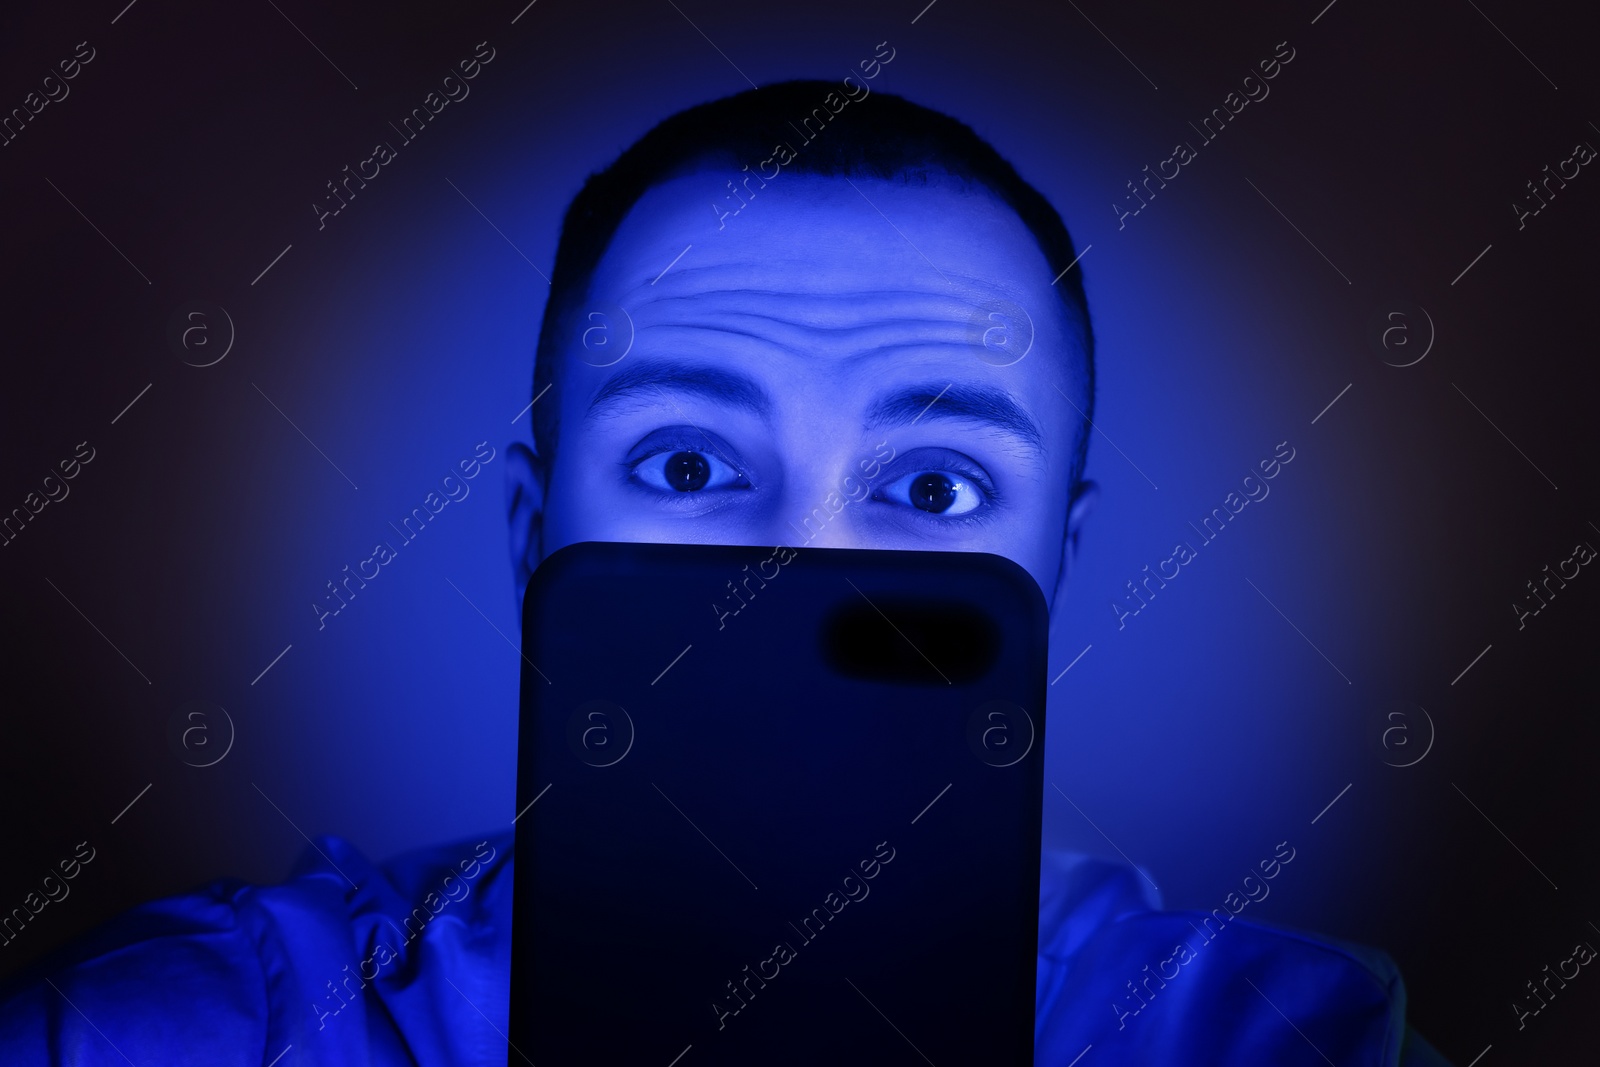 Image of Internet addiction. Man using smartphone at night. Toned in blue